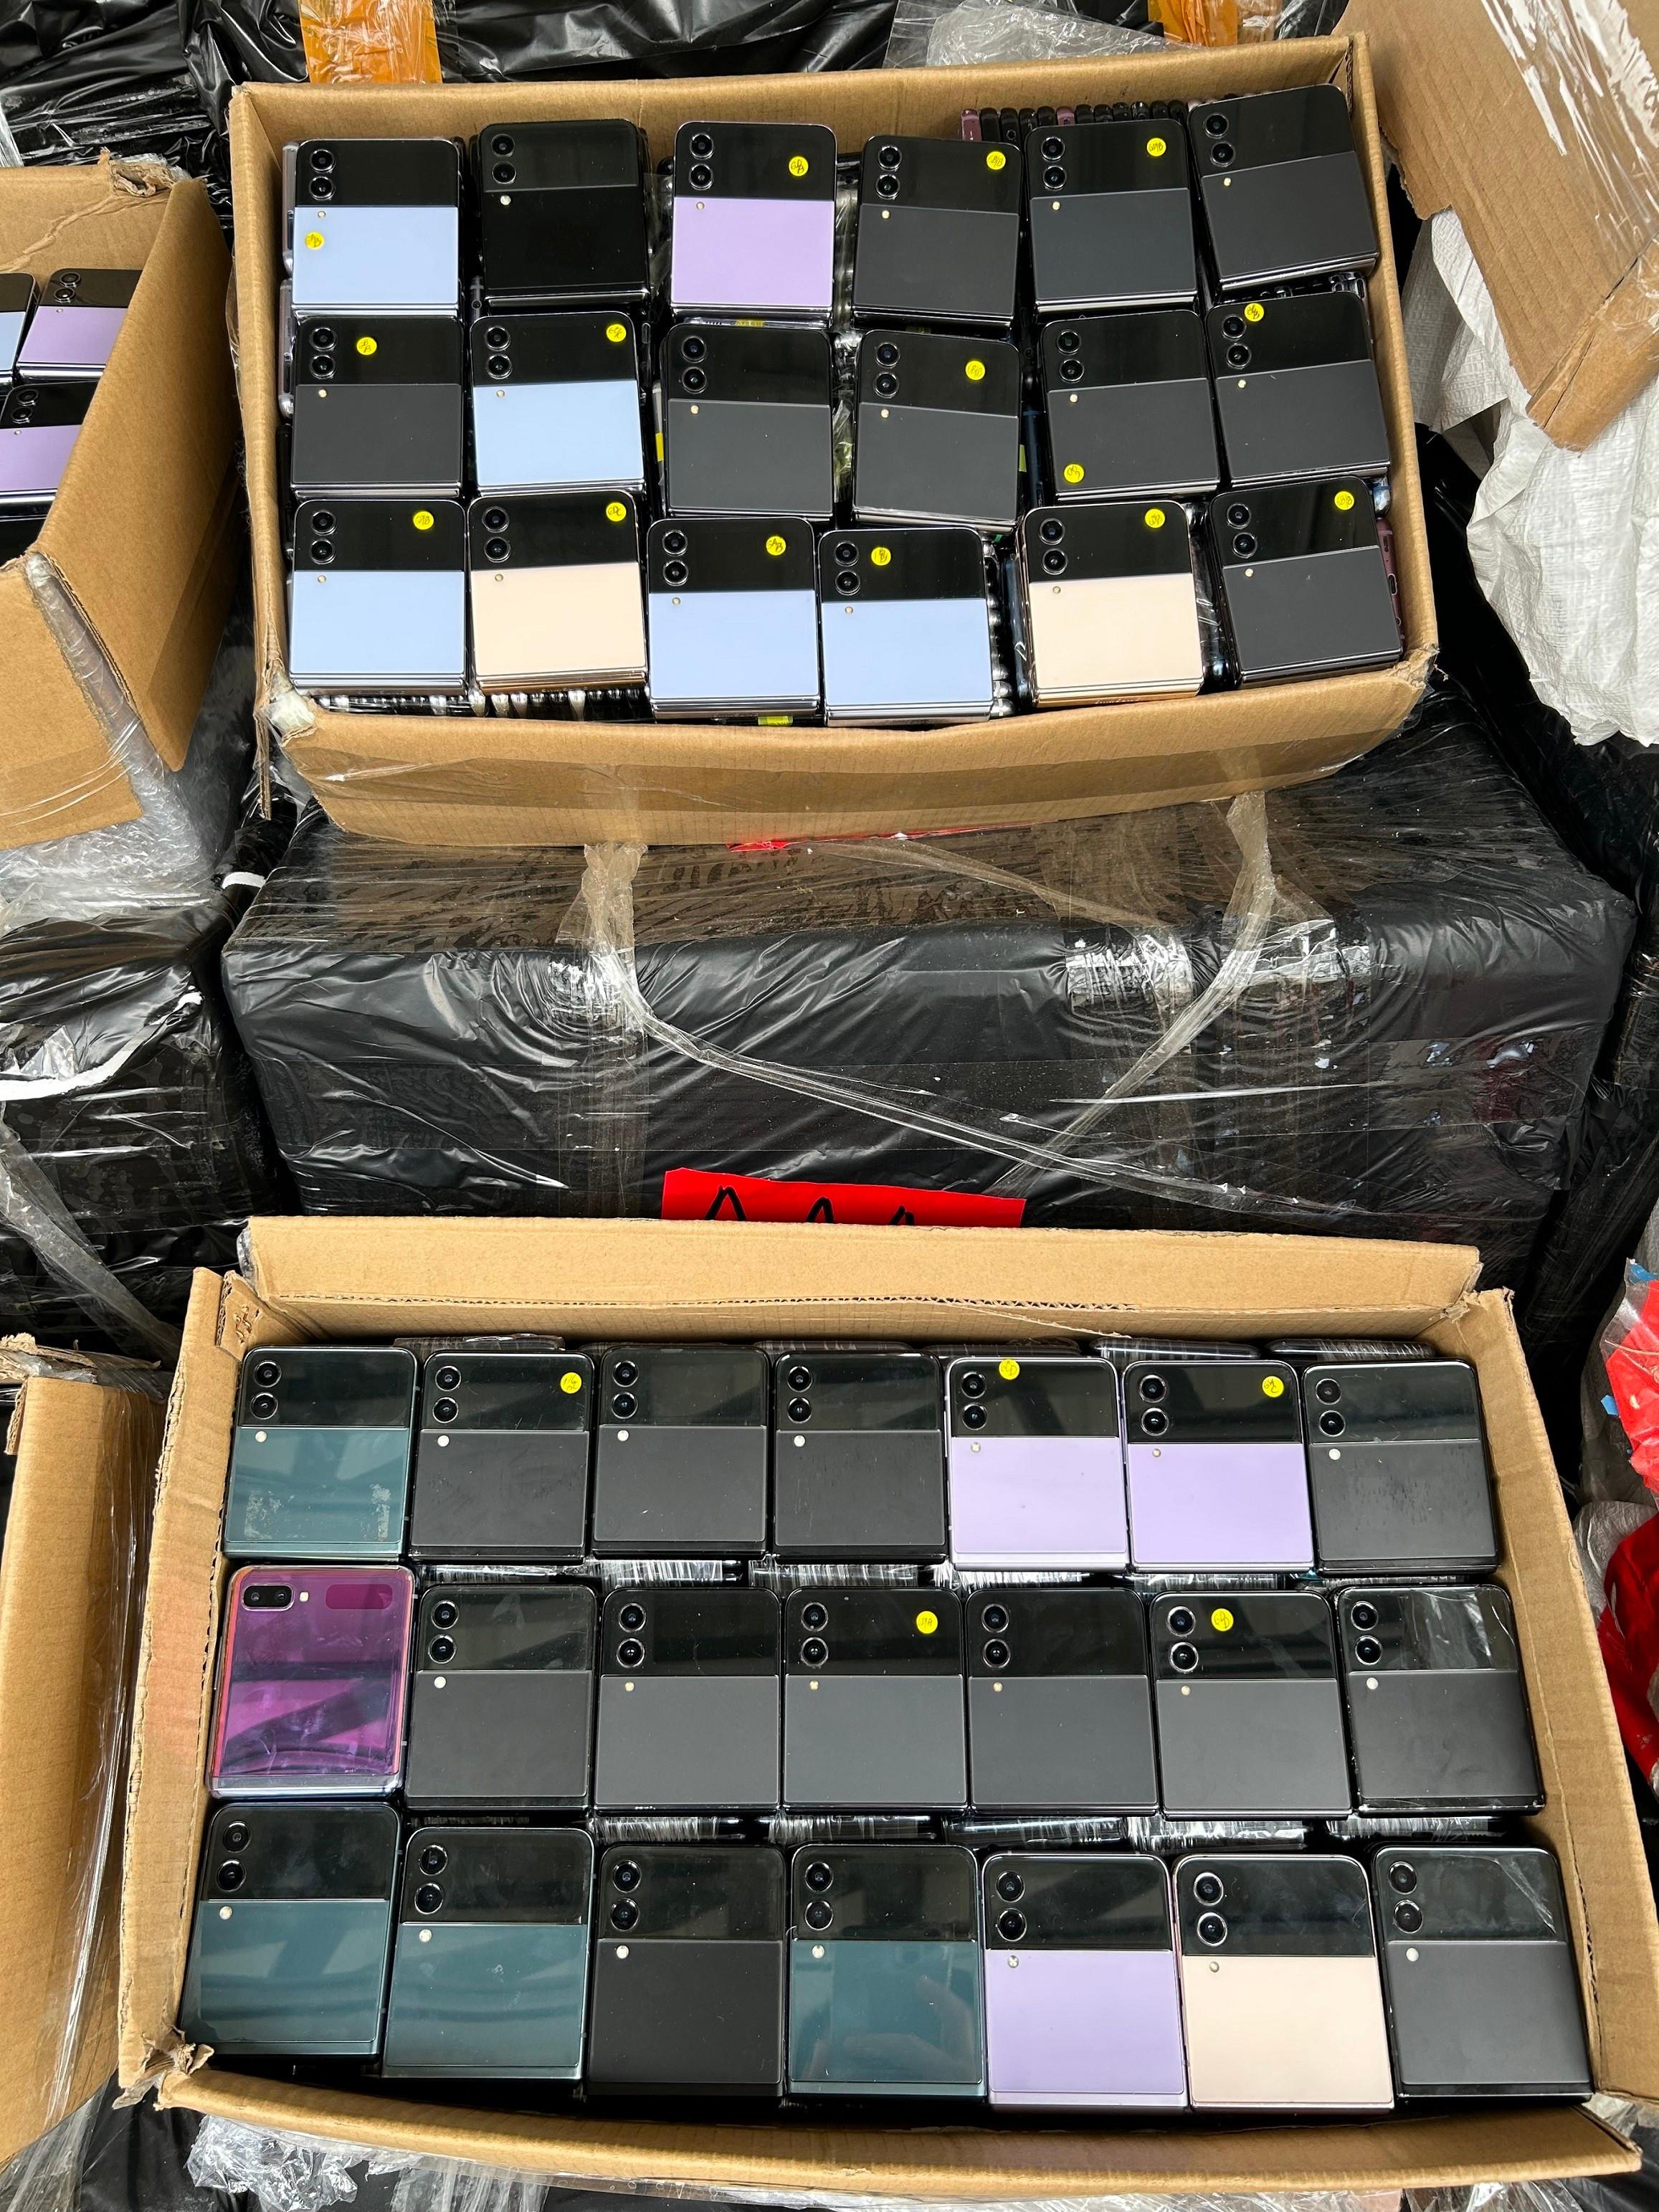 Hong Kong Customs yesterday (September 14) mounted an anti-smuggling operation in the Aberdeen Wholesale Fish Market and detected a suspected smuggling case involving a speedboat. A batch of suspected smuggled goods, with an estimated market value of about $11 million, was seized. Photo shows some of the suspected smuggled mobile phones seized.